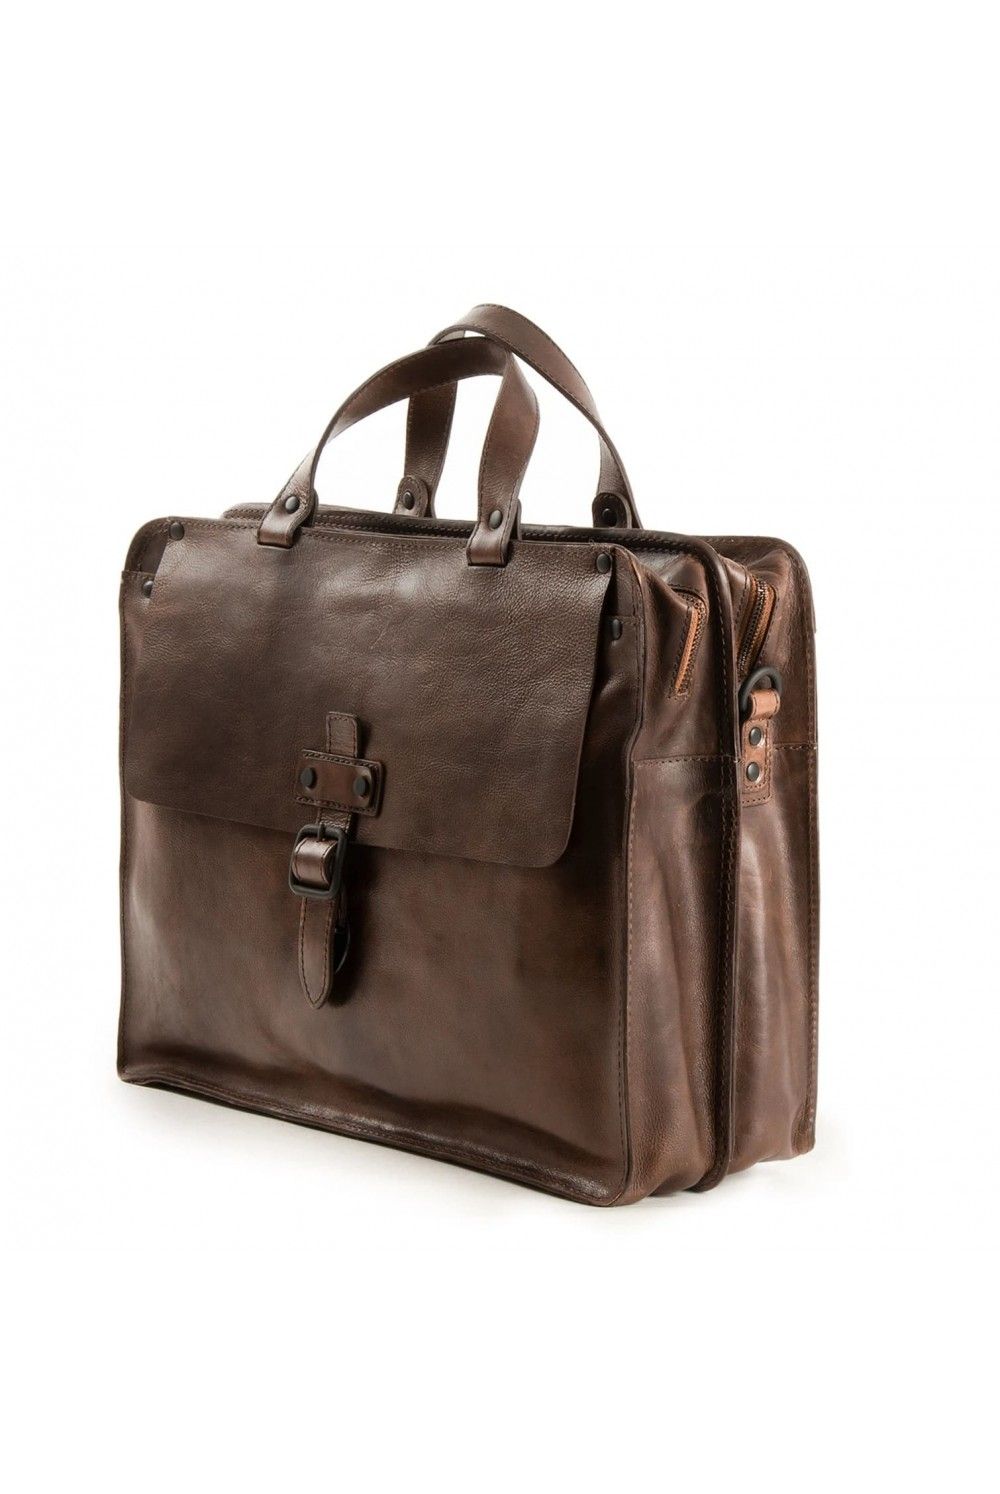 Harolds Aberdeen business bag twin brown leather